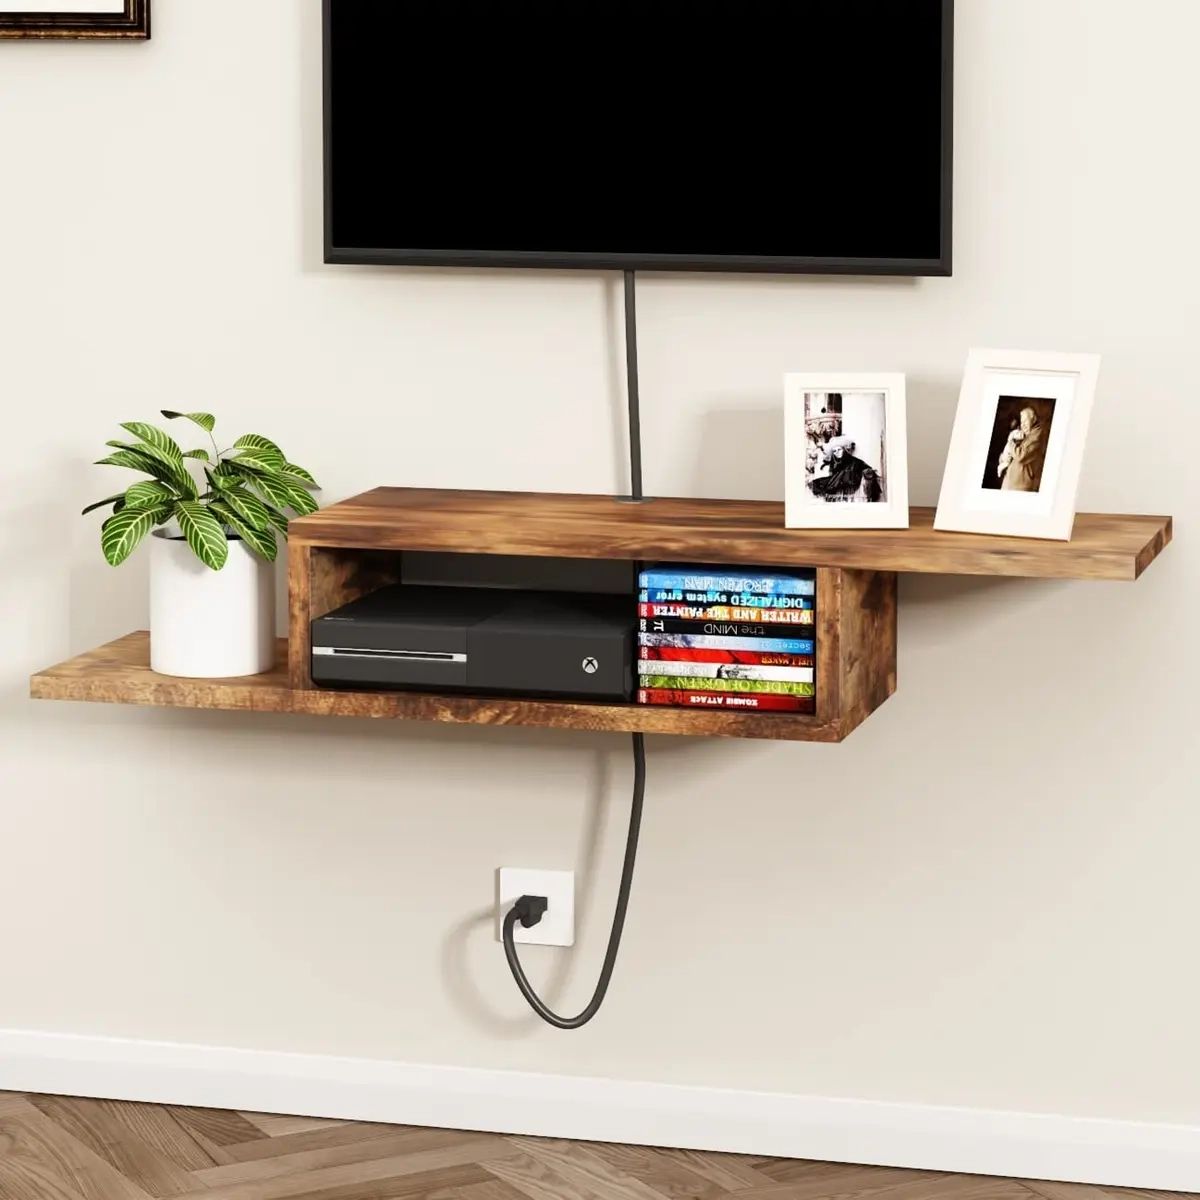 Floating Tv Stand Shelf, Wall Mount Entertainment Center Media Console For  Livin | Ebay Throughout Wall Mounted Floating Tv Stands (Photo 14 of 15)